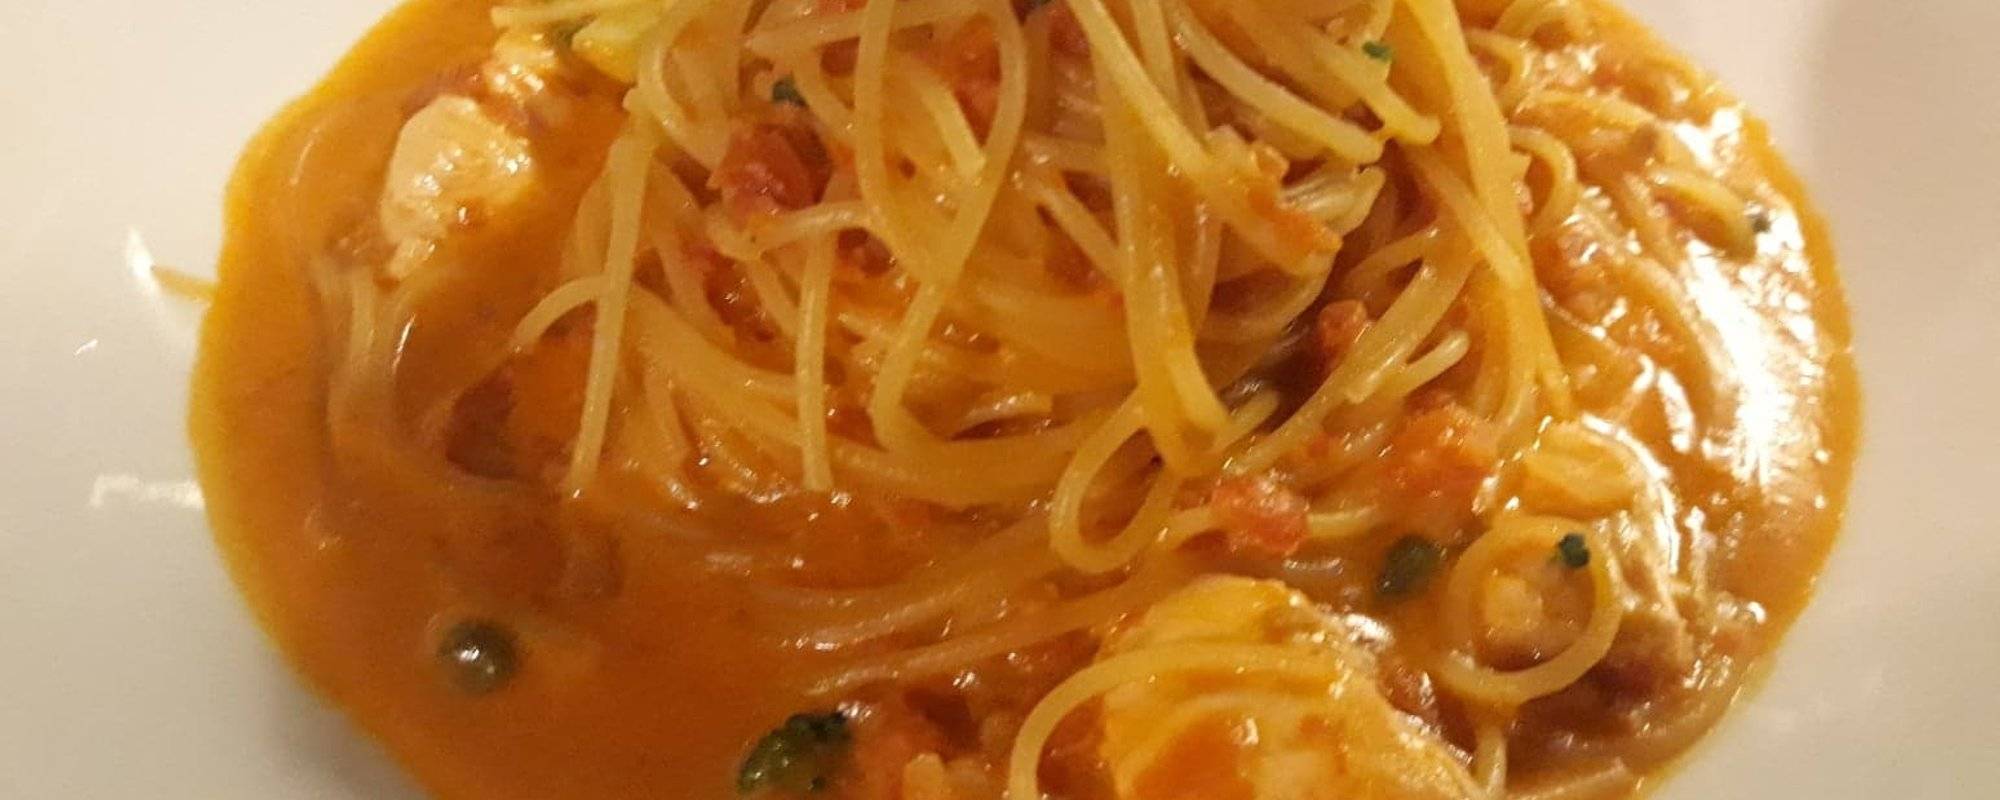 Damn, a place that can do pasta in South Korea